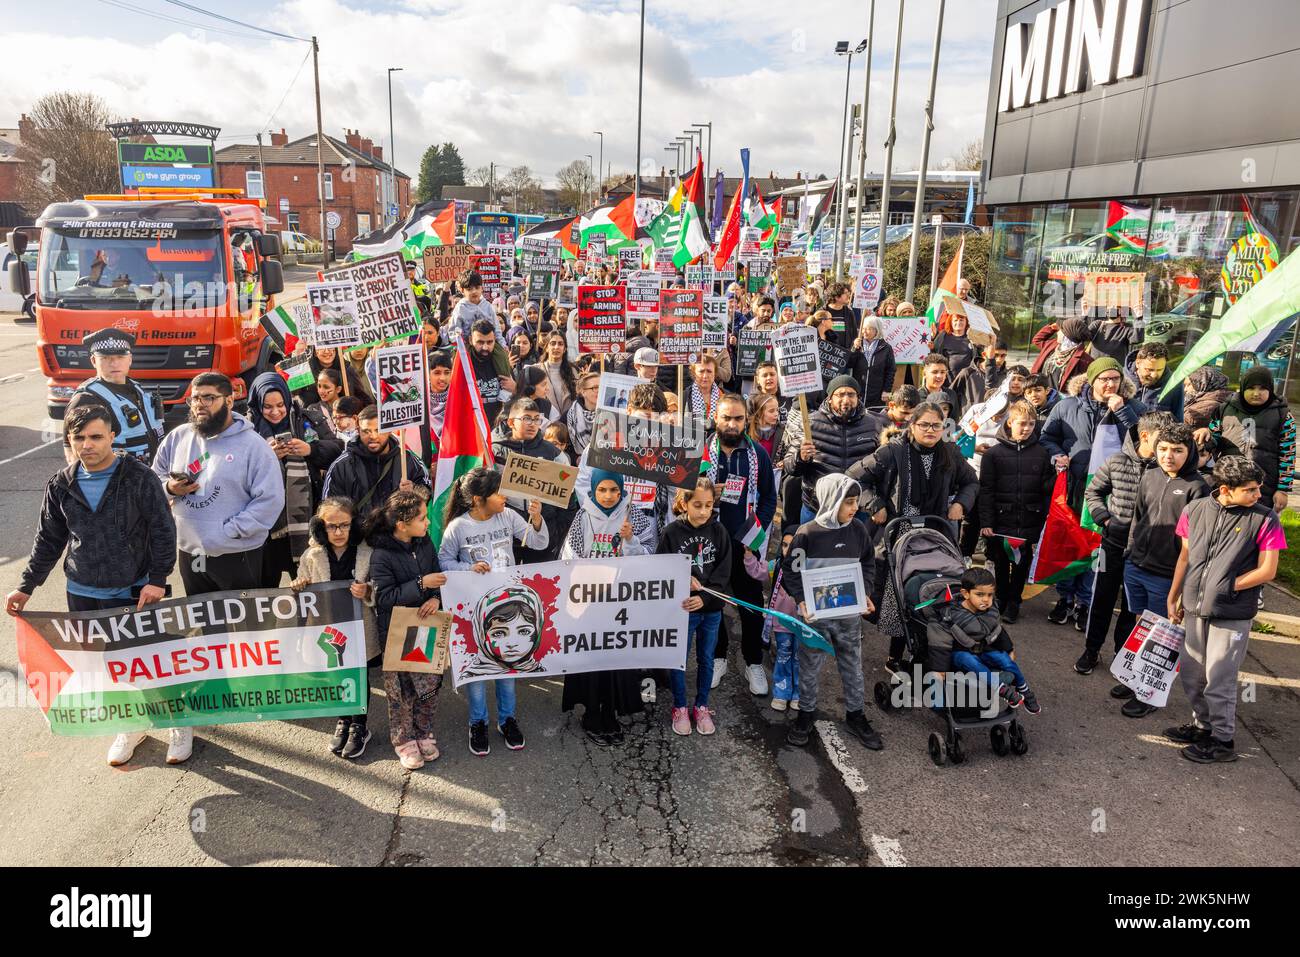 Wakefield, UK. 18 FEB, 2024. Group of pro palestine demonstrators gather on Wakefields first ever Palestine march. The march was led by several children holding various Wakefield for Palestine and Children for Palestine banners. The March started At ASDA on Dewsbury road and made its way into Wakefield city center. Credit Milo Chandler/Alamy Live News Stock Photo